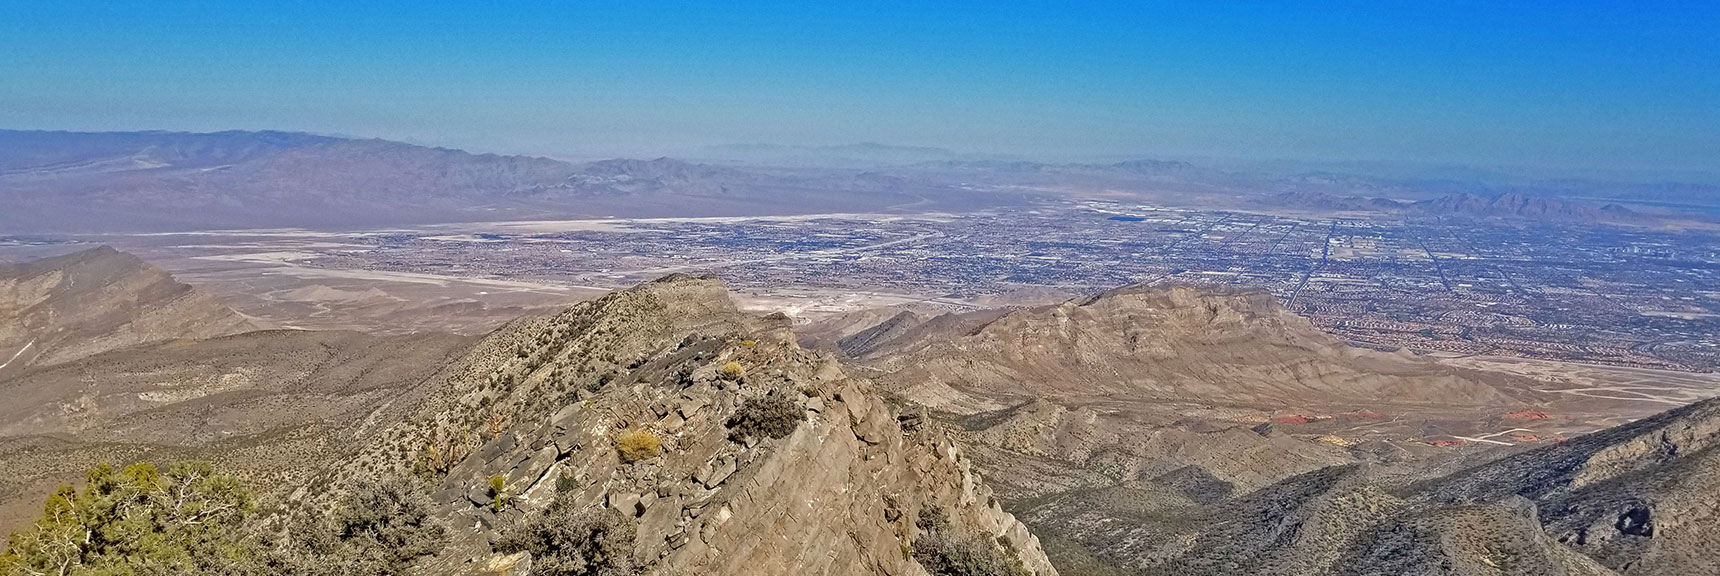 Centennial Hills Area and Gass Peak from La Madre Mt. Summit | La Madre Mountain,, El Padre Mountain, Burnt Peak | La Madre Mountains Wilderness, Nevada